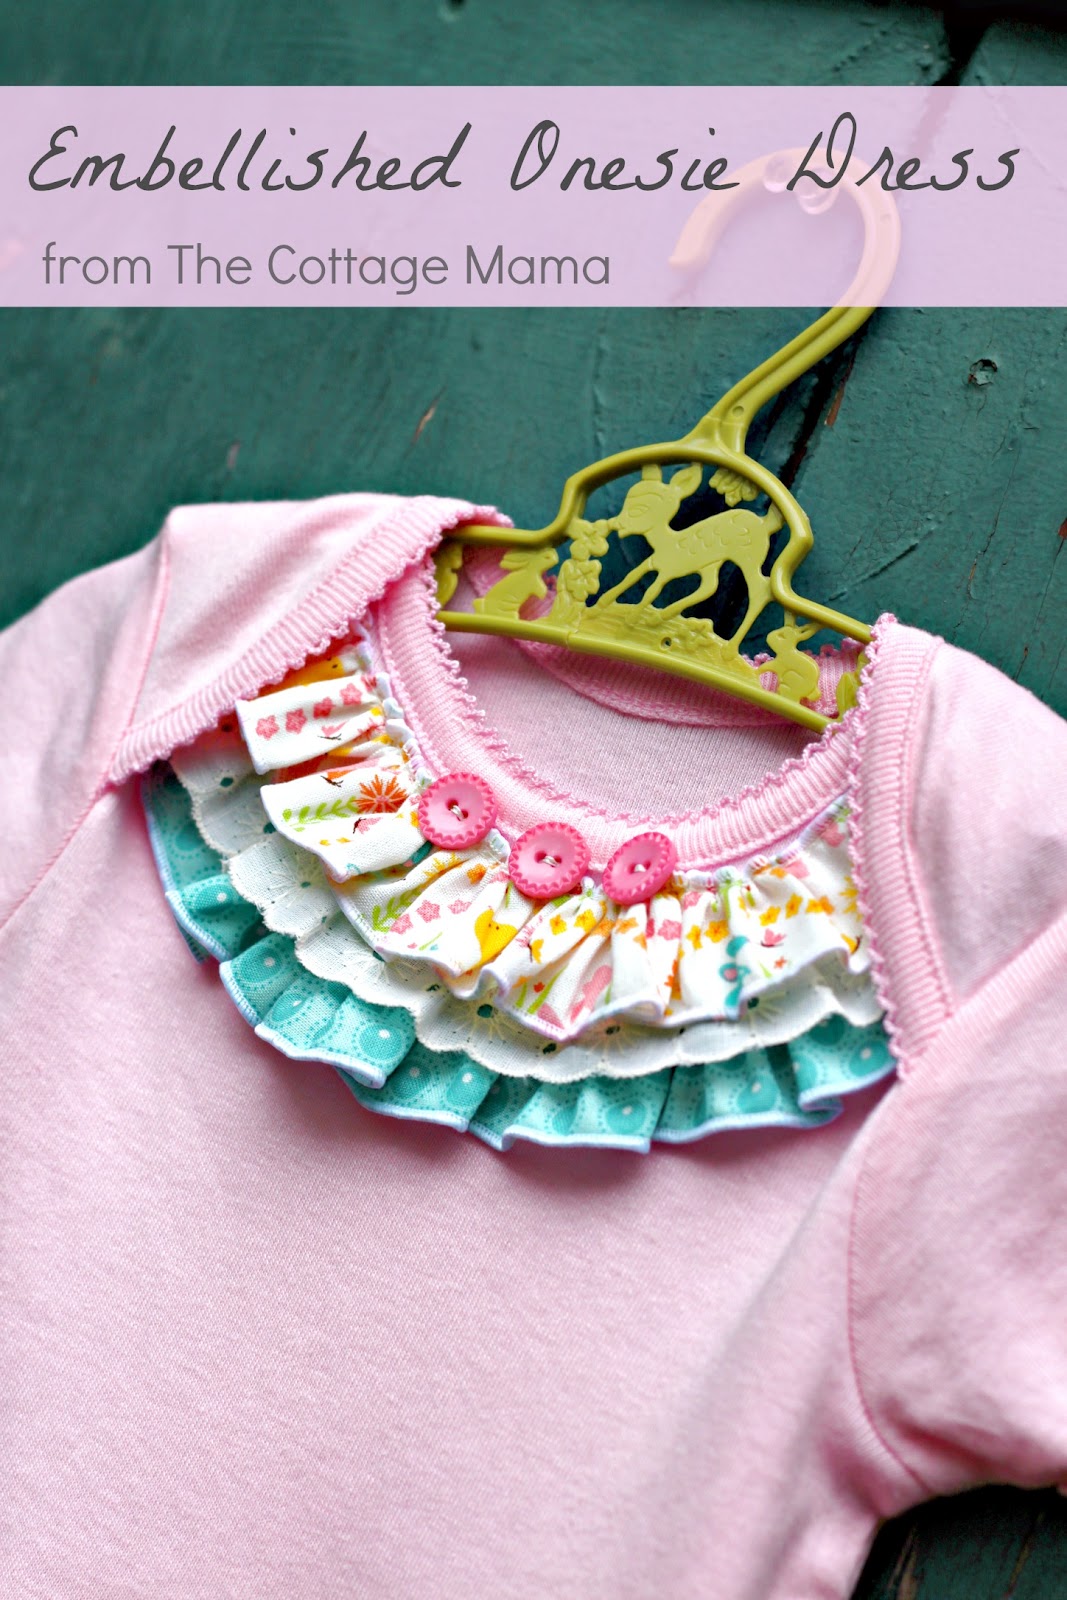 Embellished Onesie Baby Girl Dress - The Cottage Mama